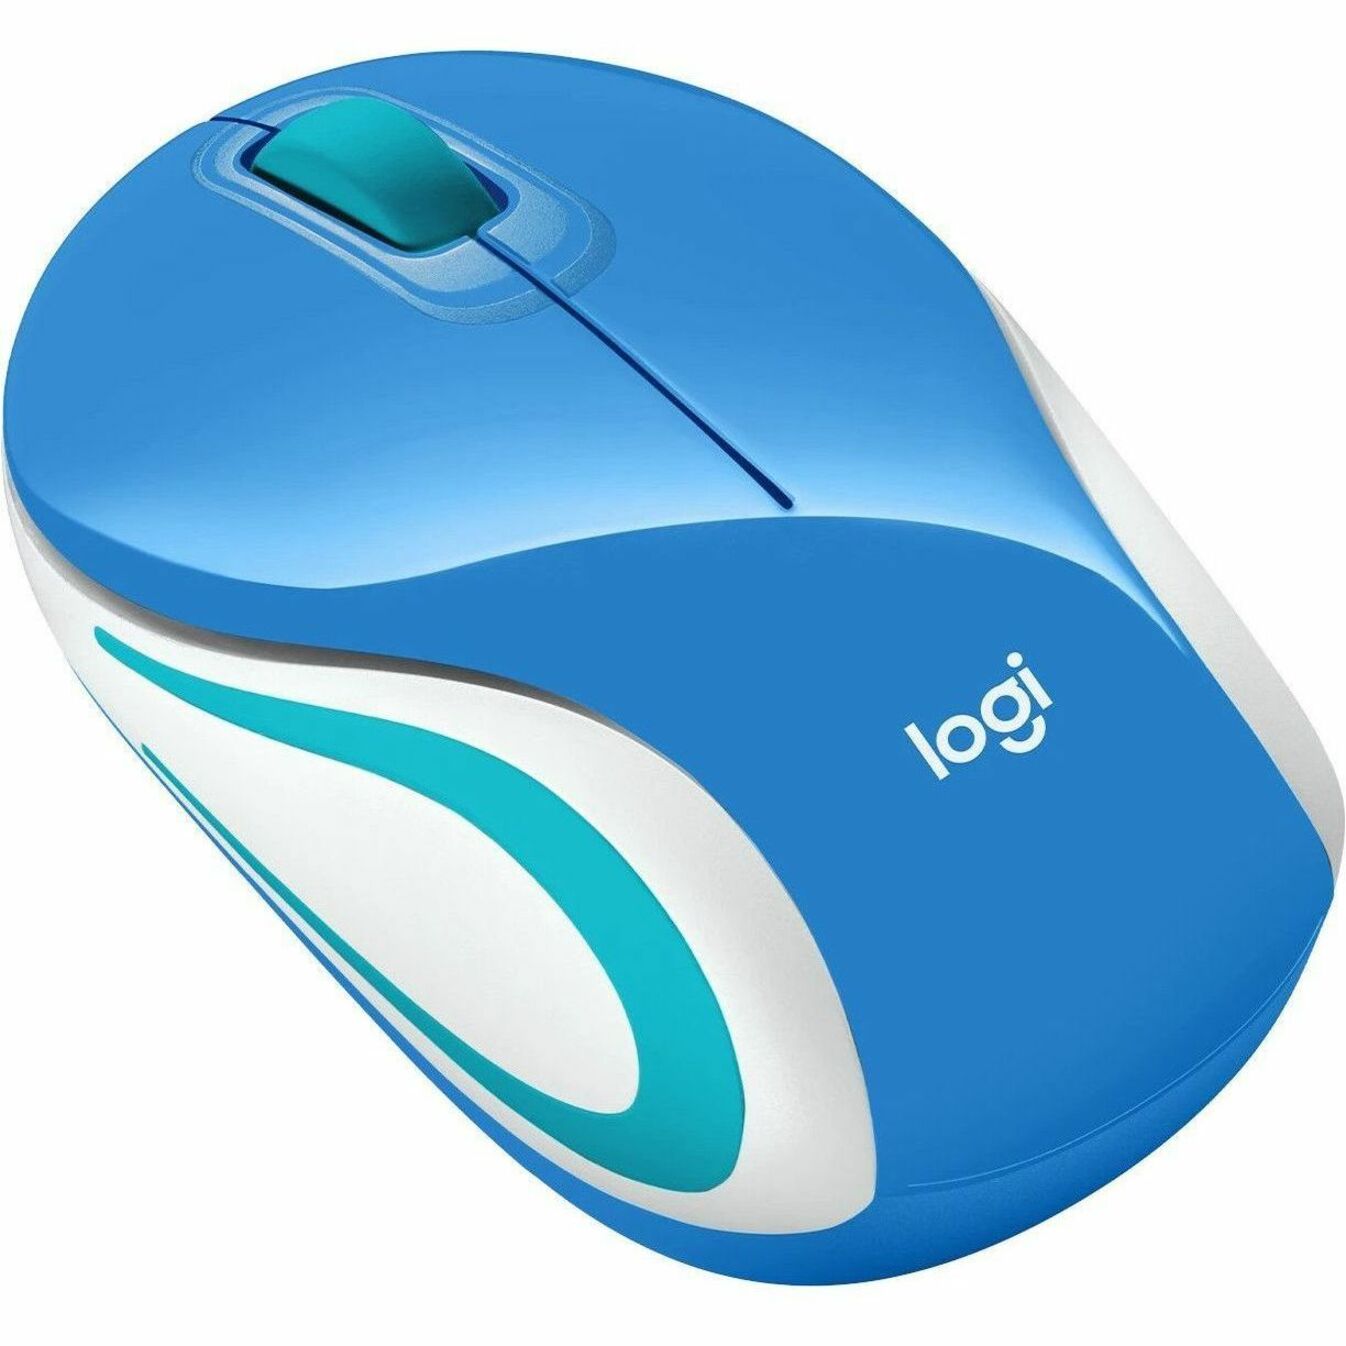 Logitech 910-004840 Wireless Ultra Portable M187 Mouse, Extra Small, 1000 dpi, 3 Buttons